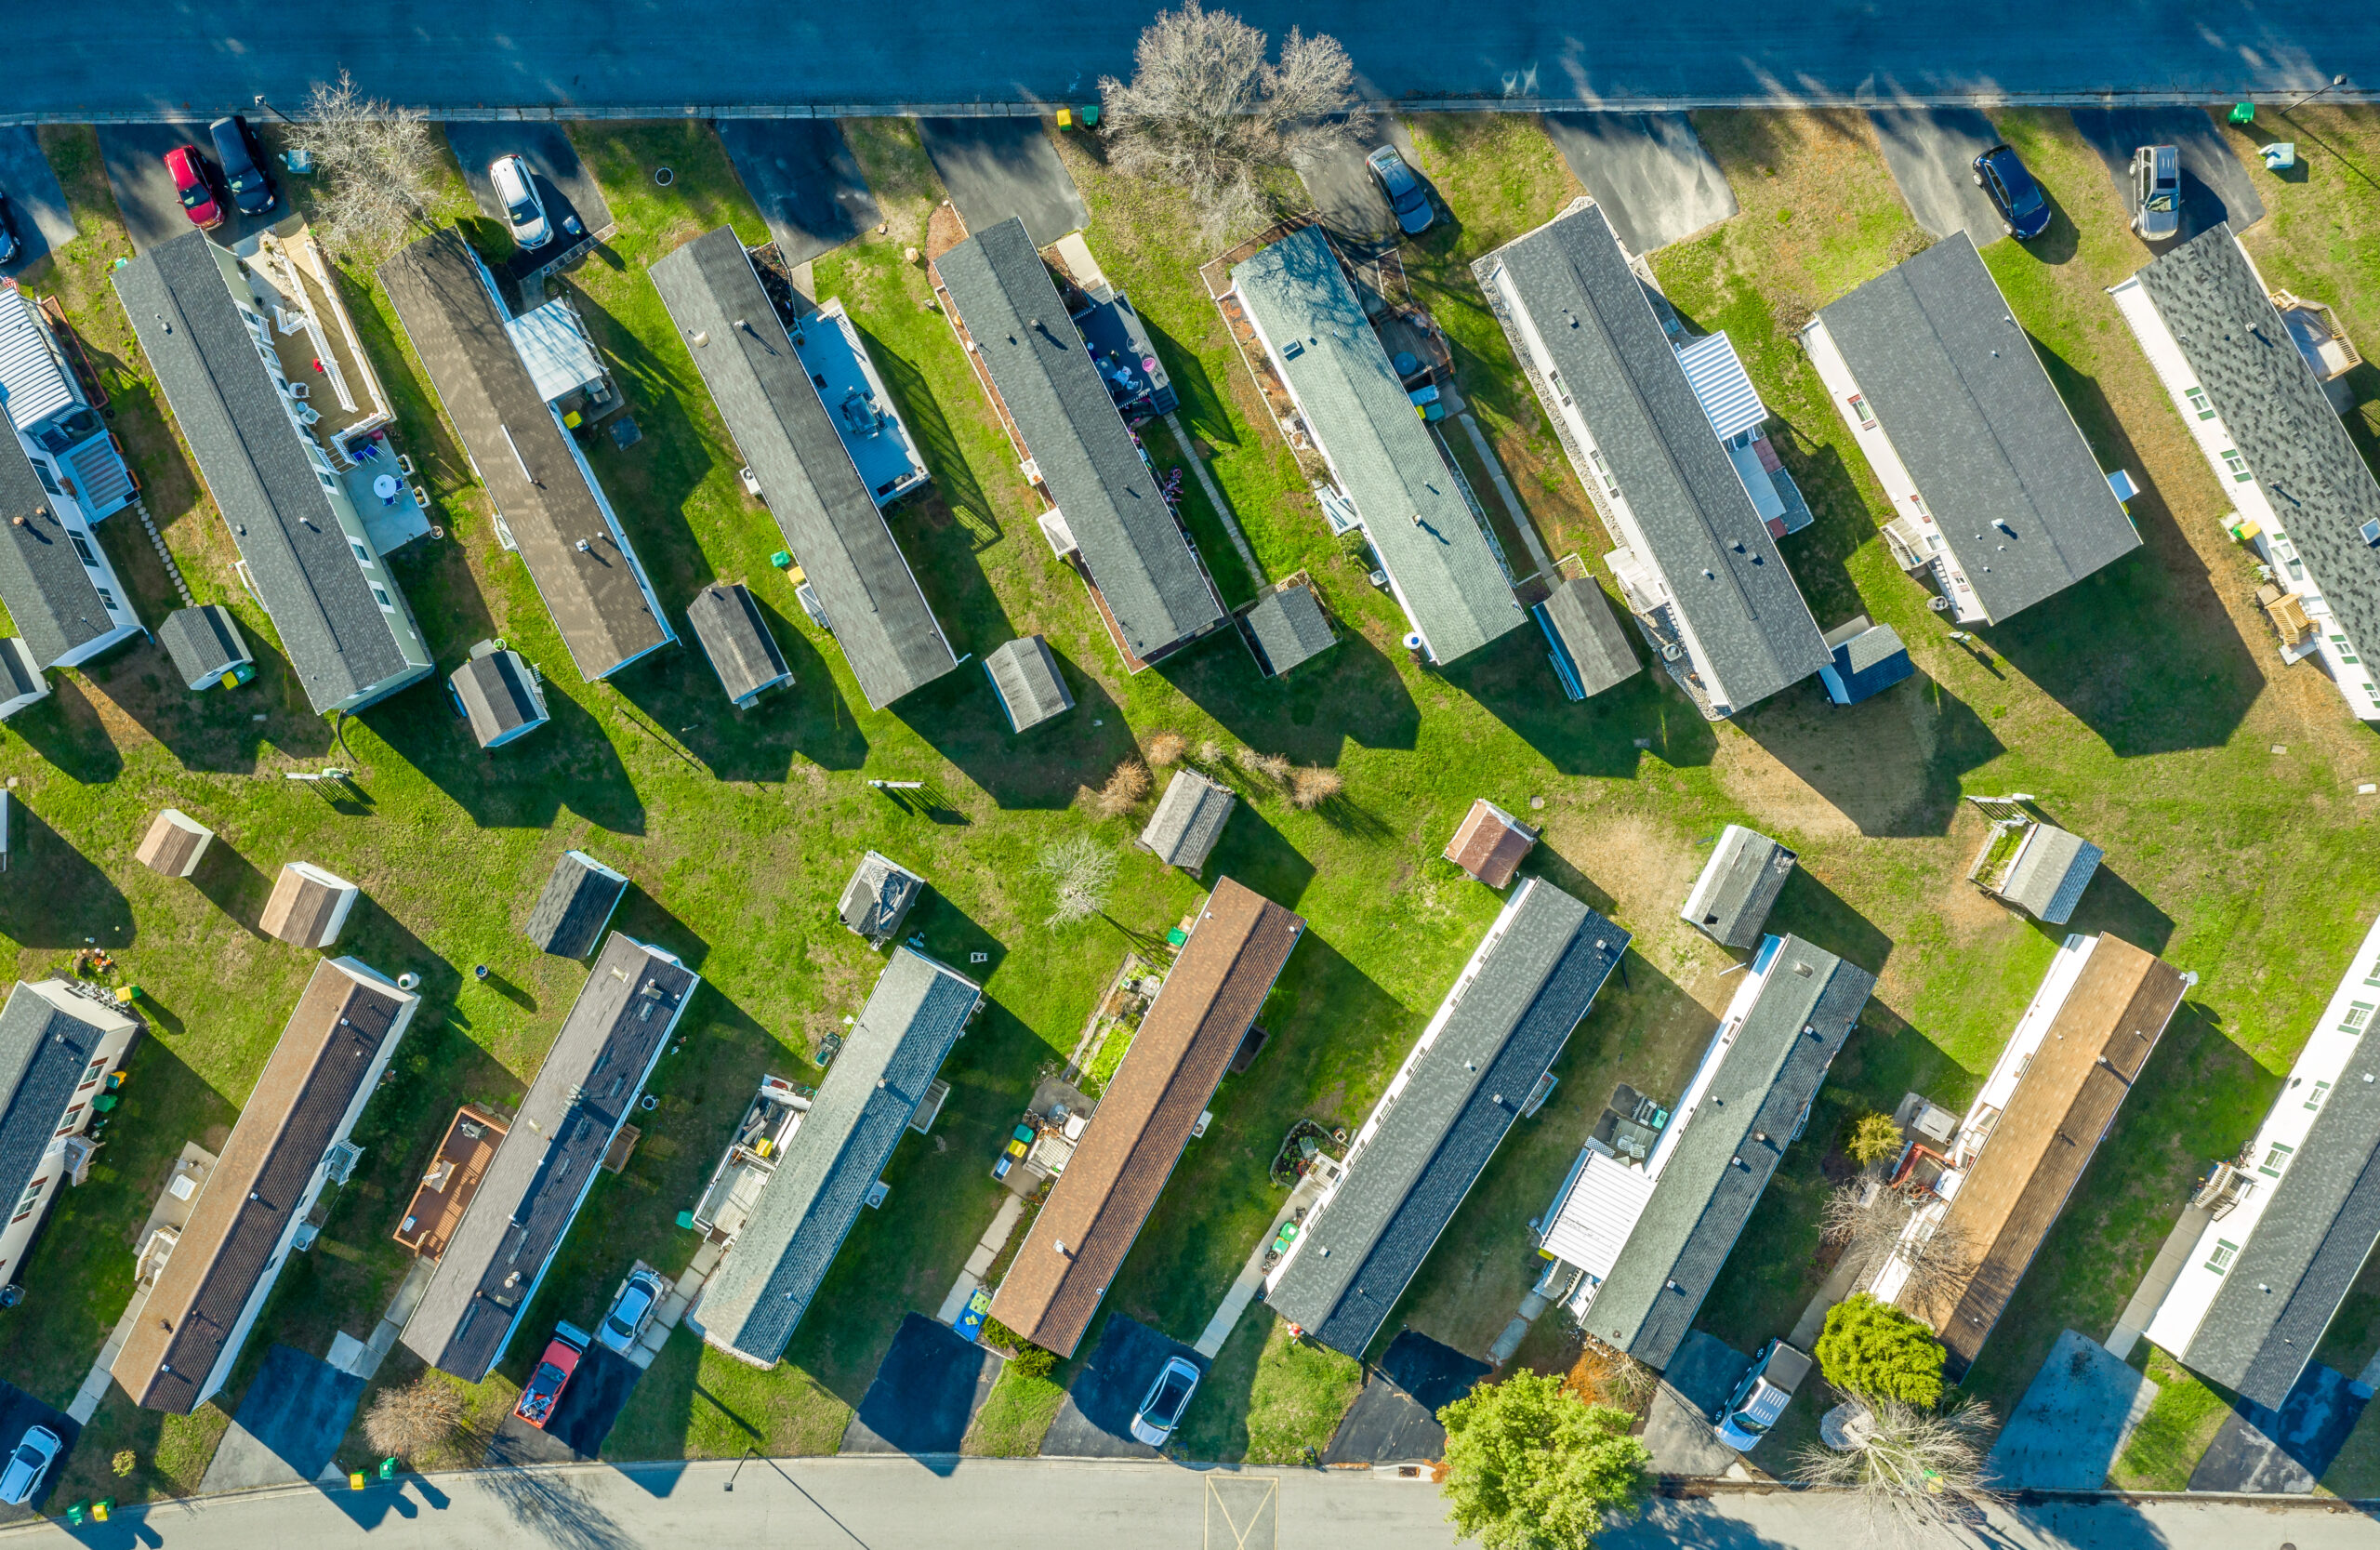 Aerial,View,Of,Trailer,Park,Houses,Laid,Out,Like,A